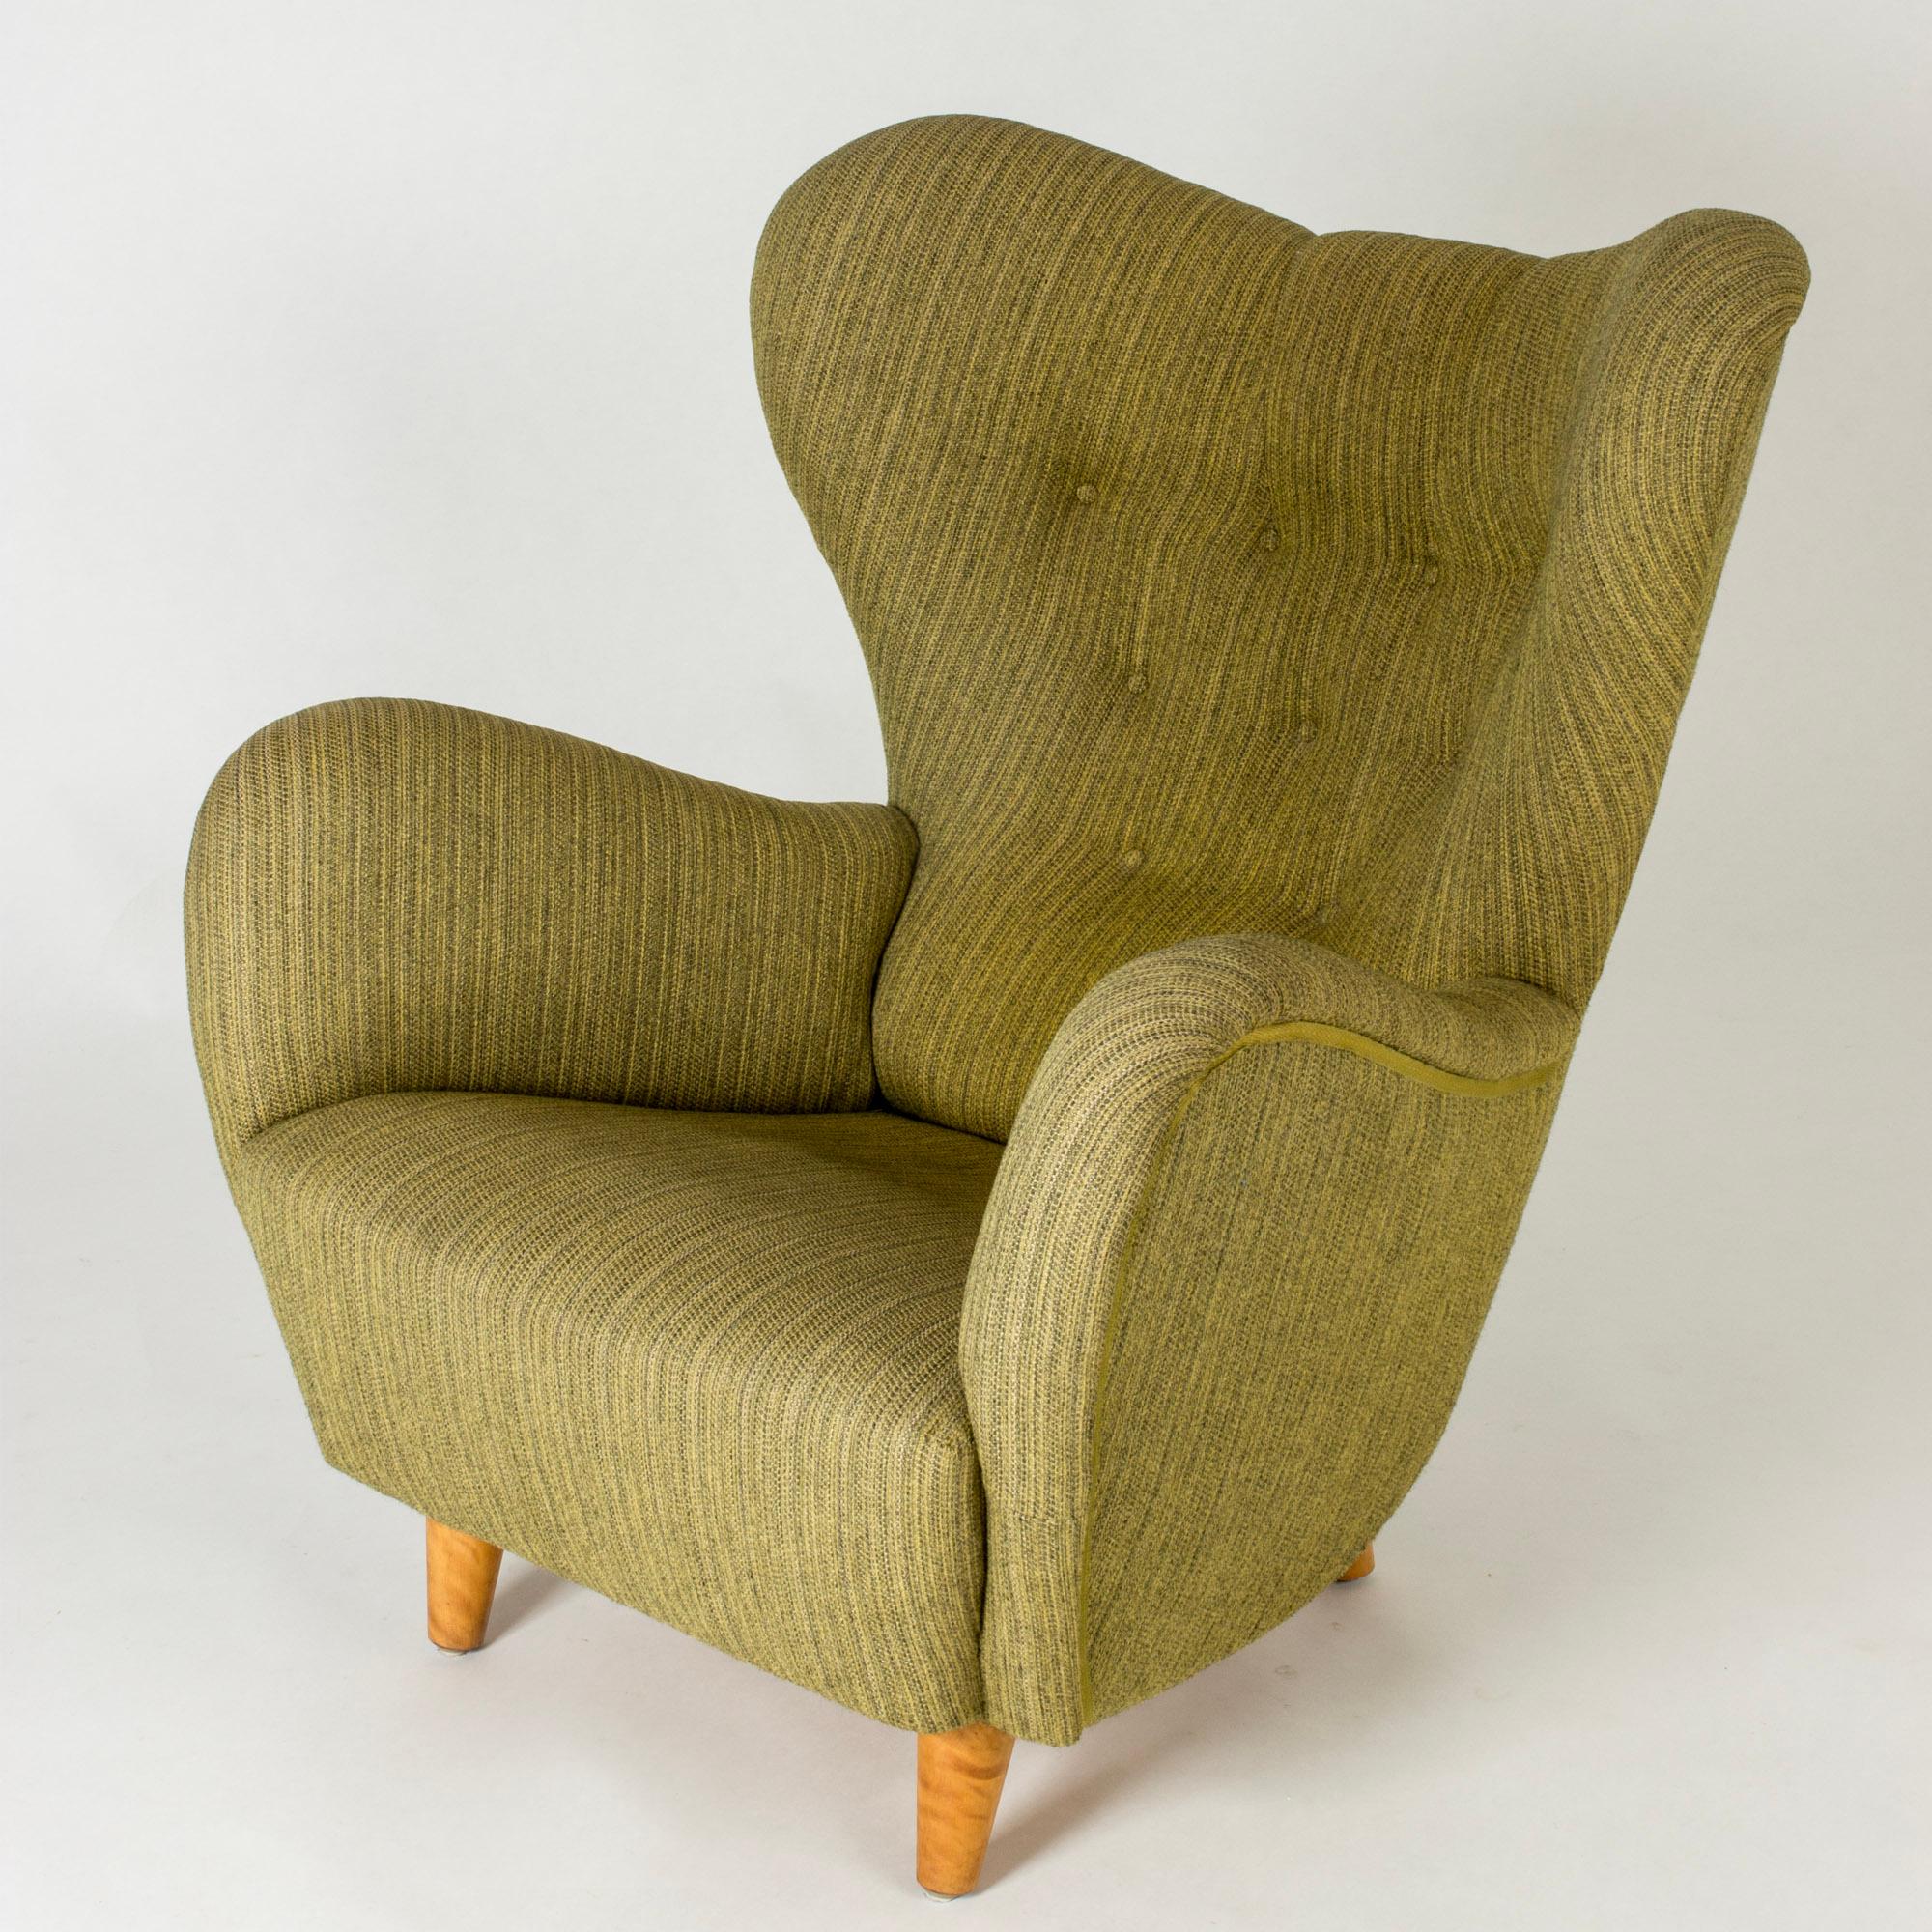 Elegant lounge chair by Otto Schulz in an oversized, ample design. Original green upholstery made from wool fabric.